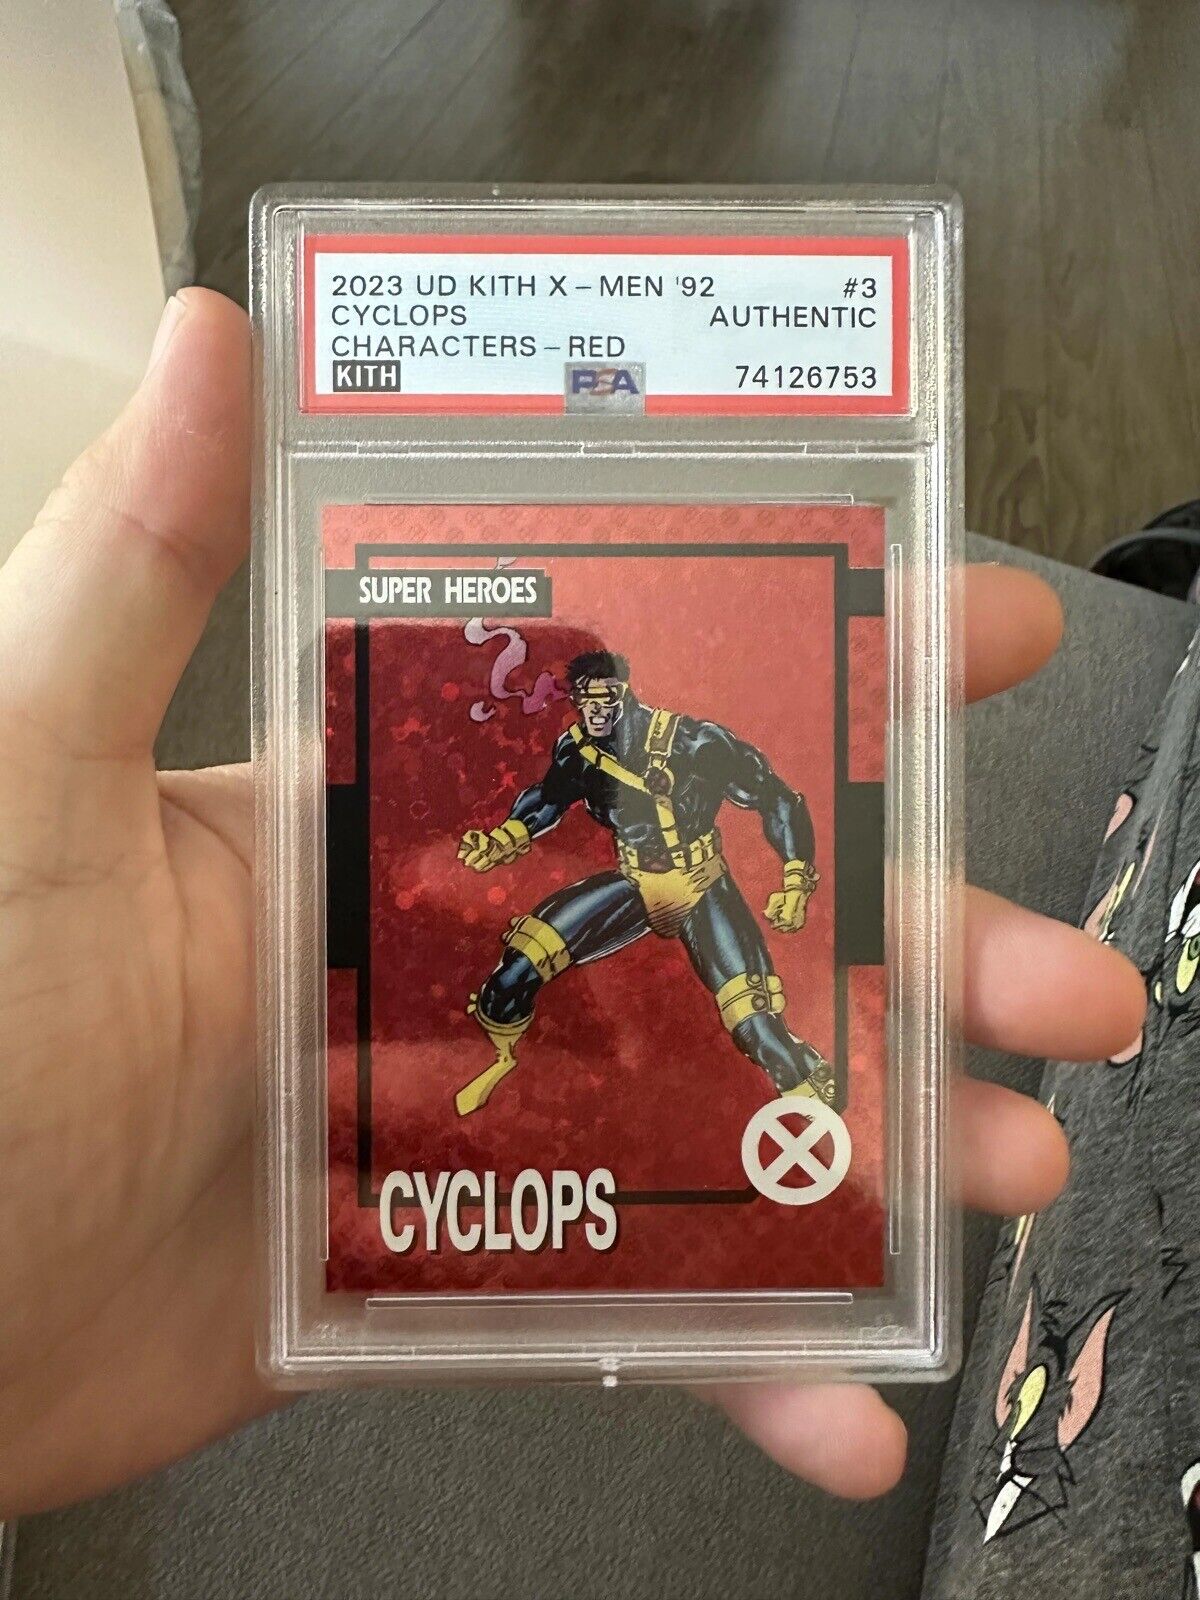 2023 Upper Deck Kith '92 Characters 3 Cyclops Red 1/100 X-Men Card PSA Authentic